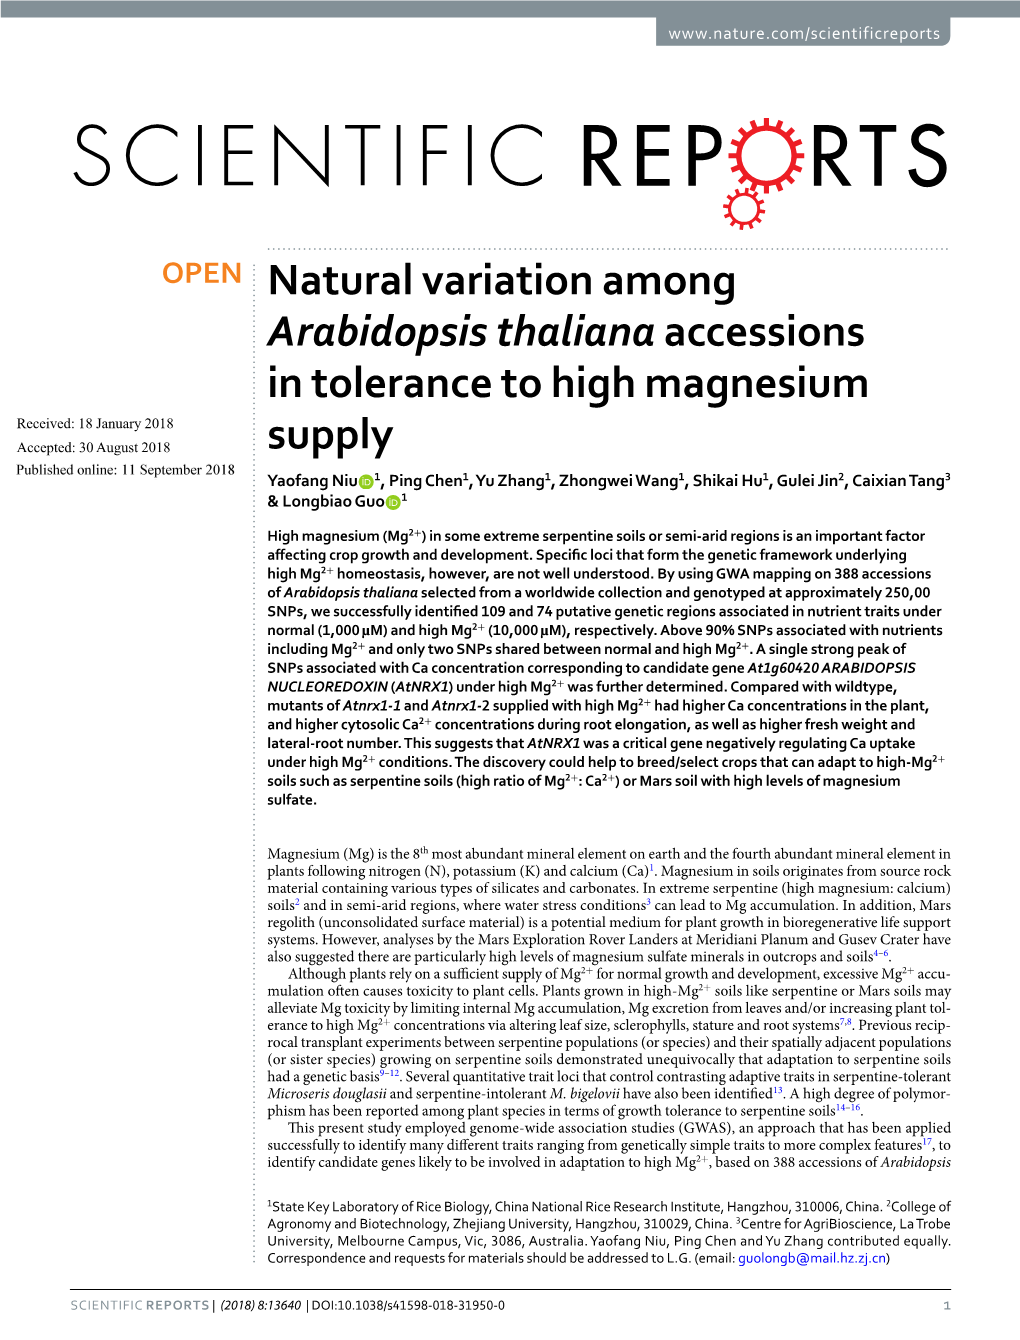 Natural Variation Among Arabidopsis Thaliana Accessions in Tolerance To